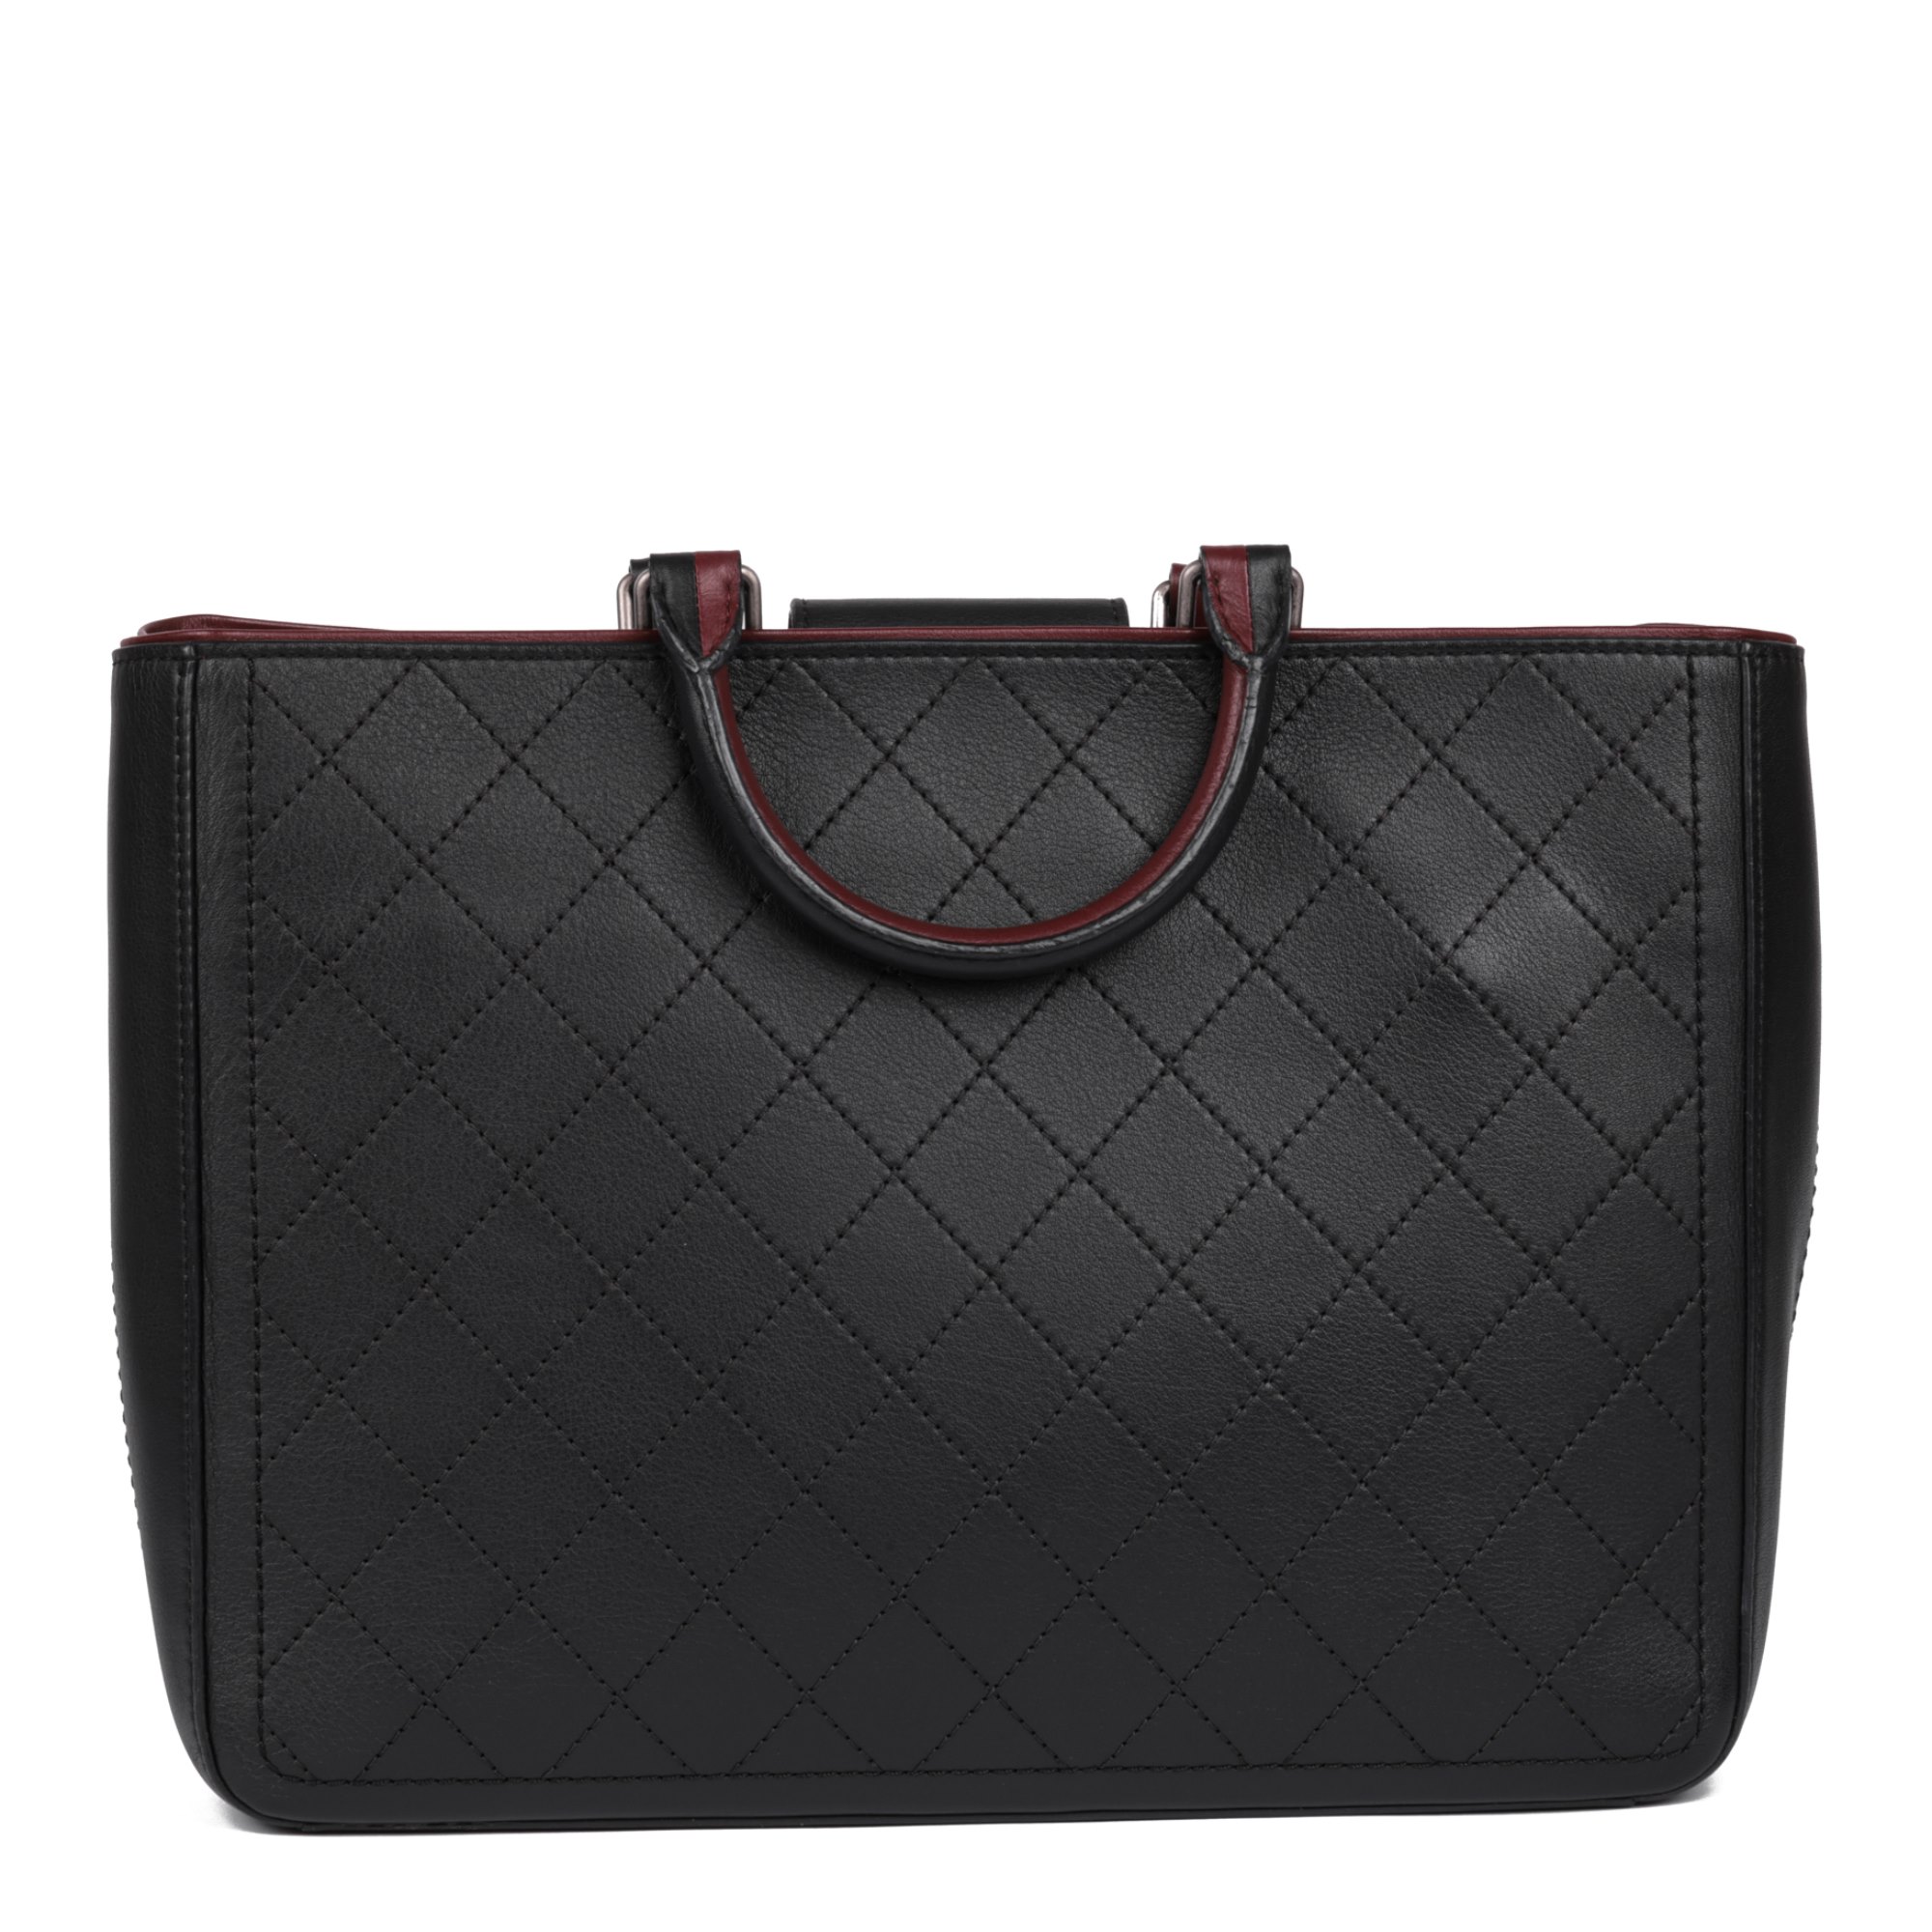 Chanel Black Quilted Bullskin Leather & Burgundy Large Classic Shopping Tote